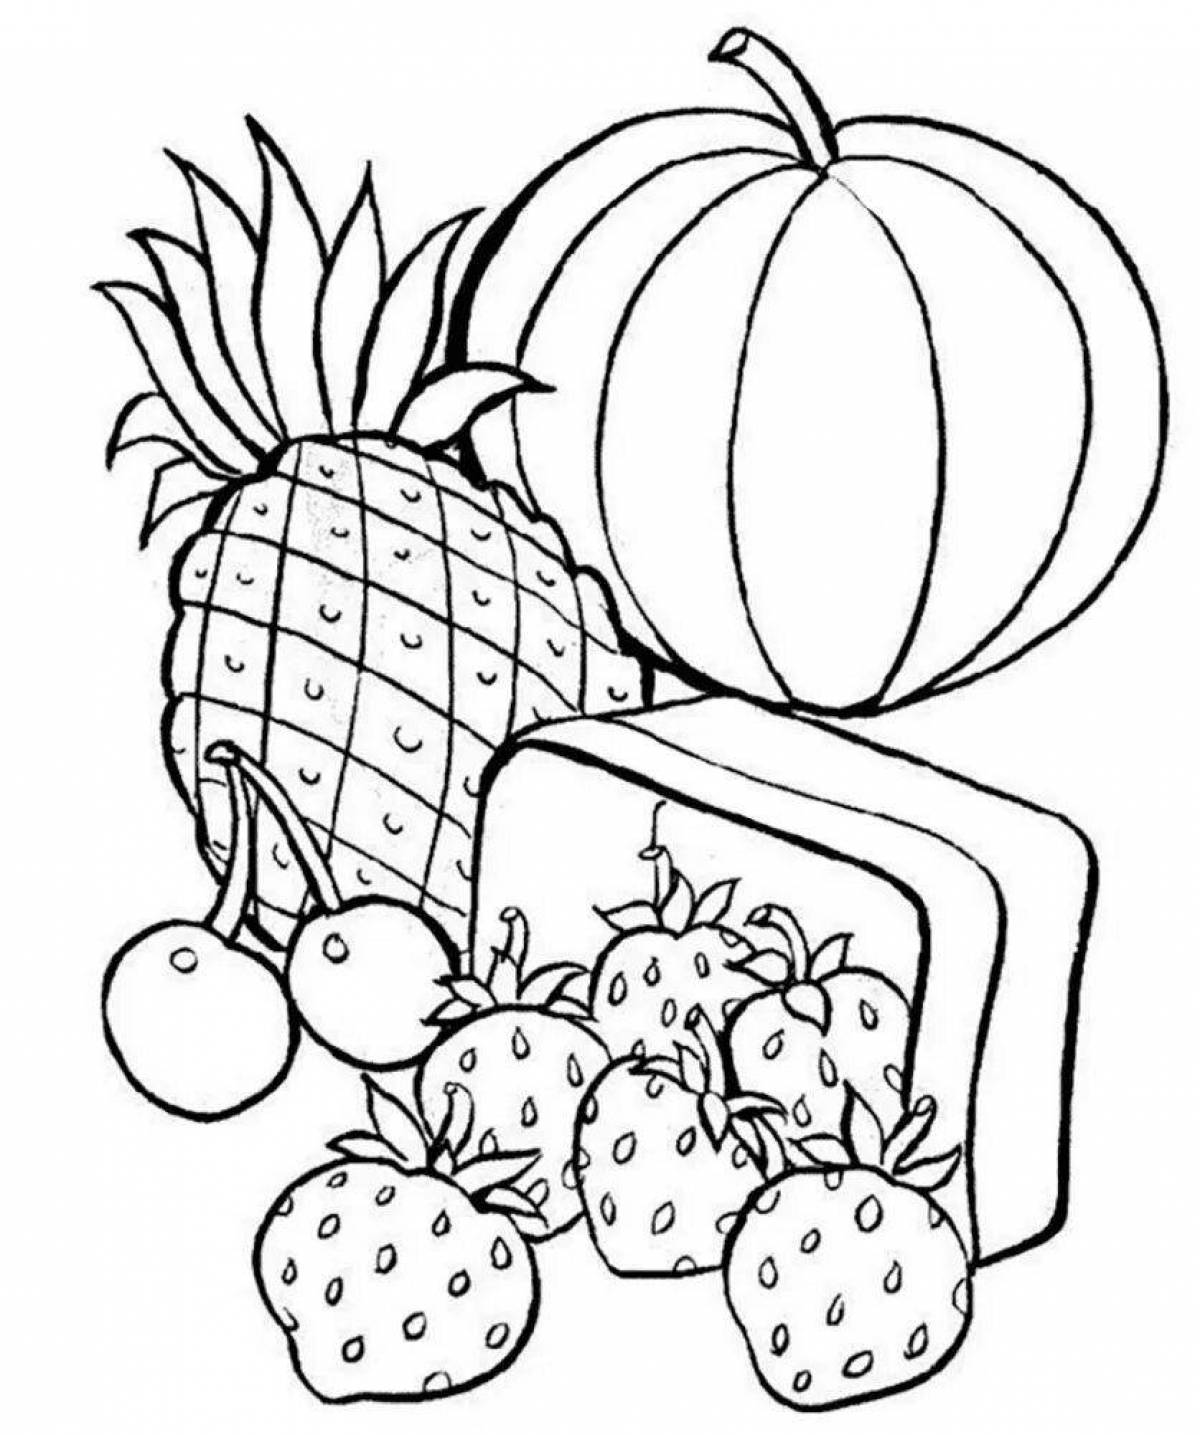 Fun coloring book fruits and berries for girls